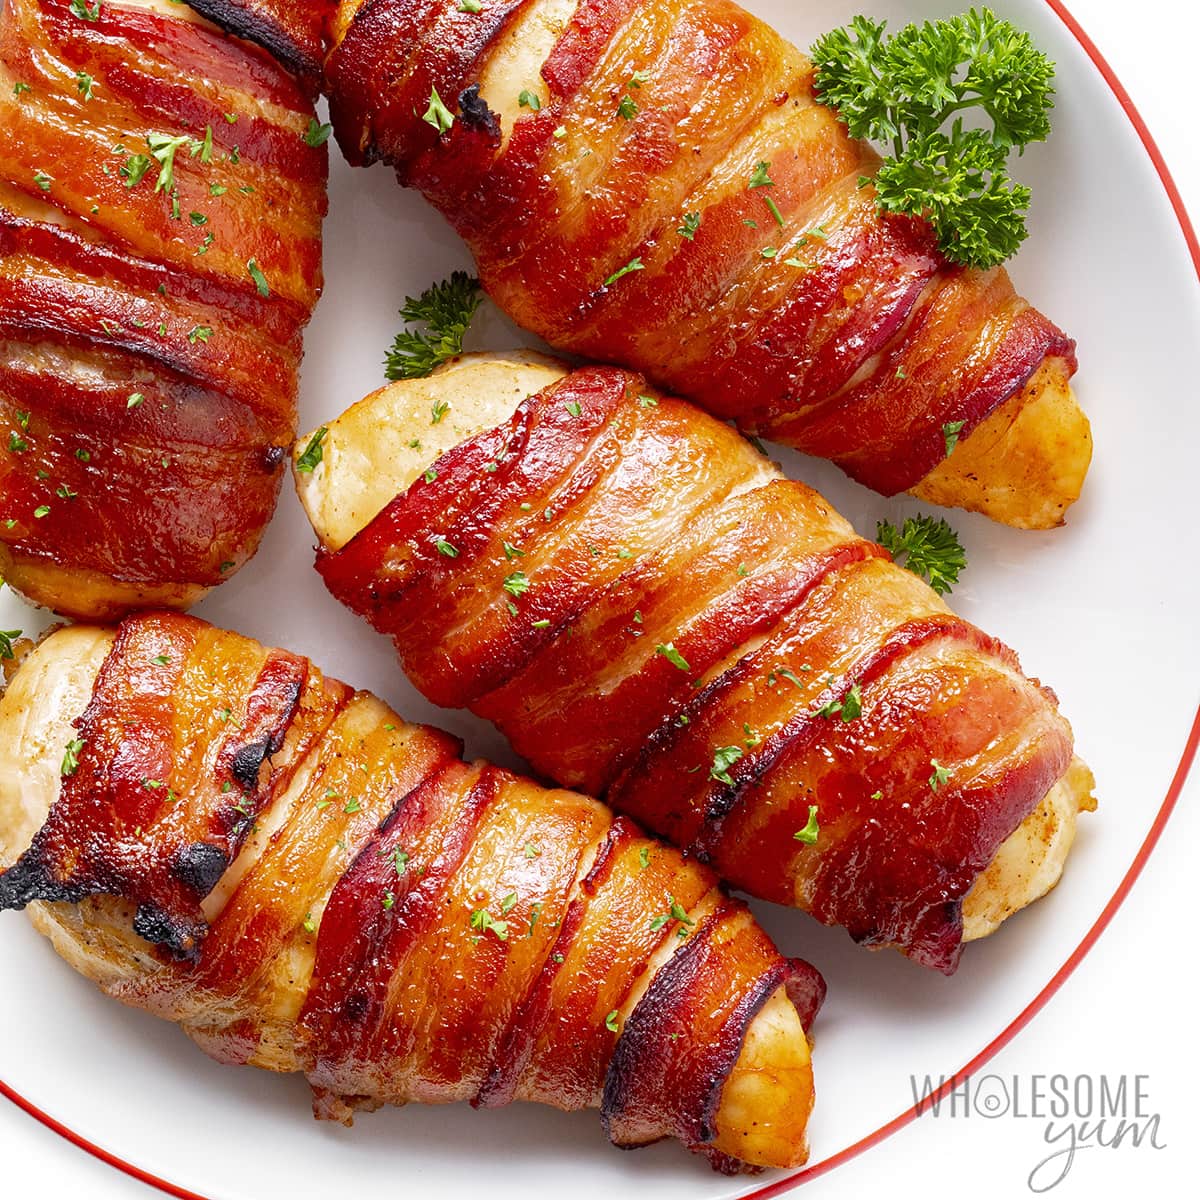 Baked bacon wrapped chicken breasts sprinkled with parsley.